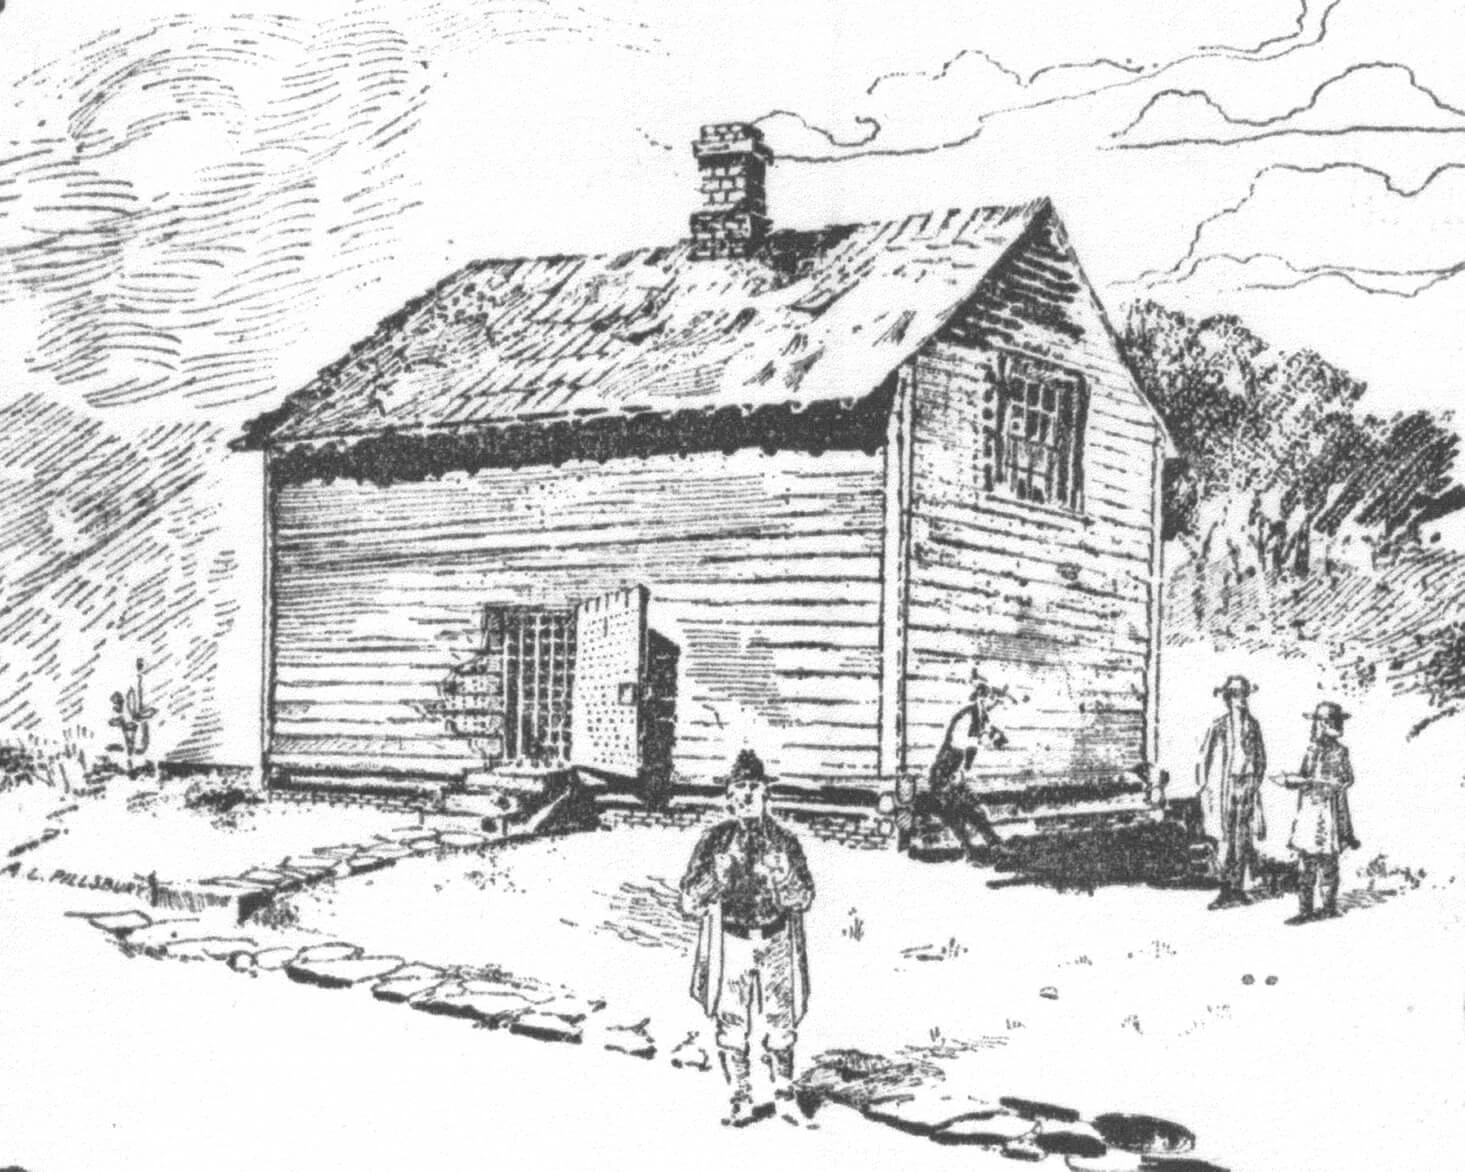 Black and white sketch of cabin with barred door and window, people mill about outside.